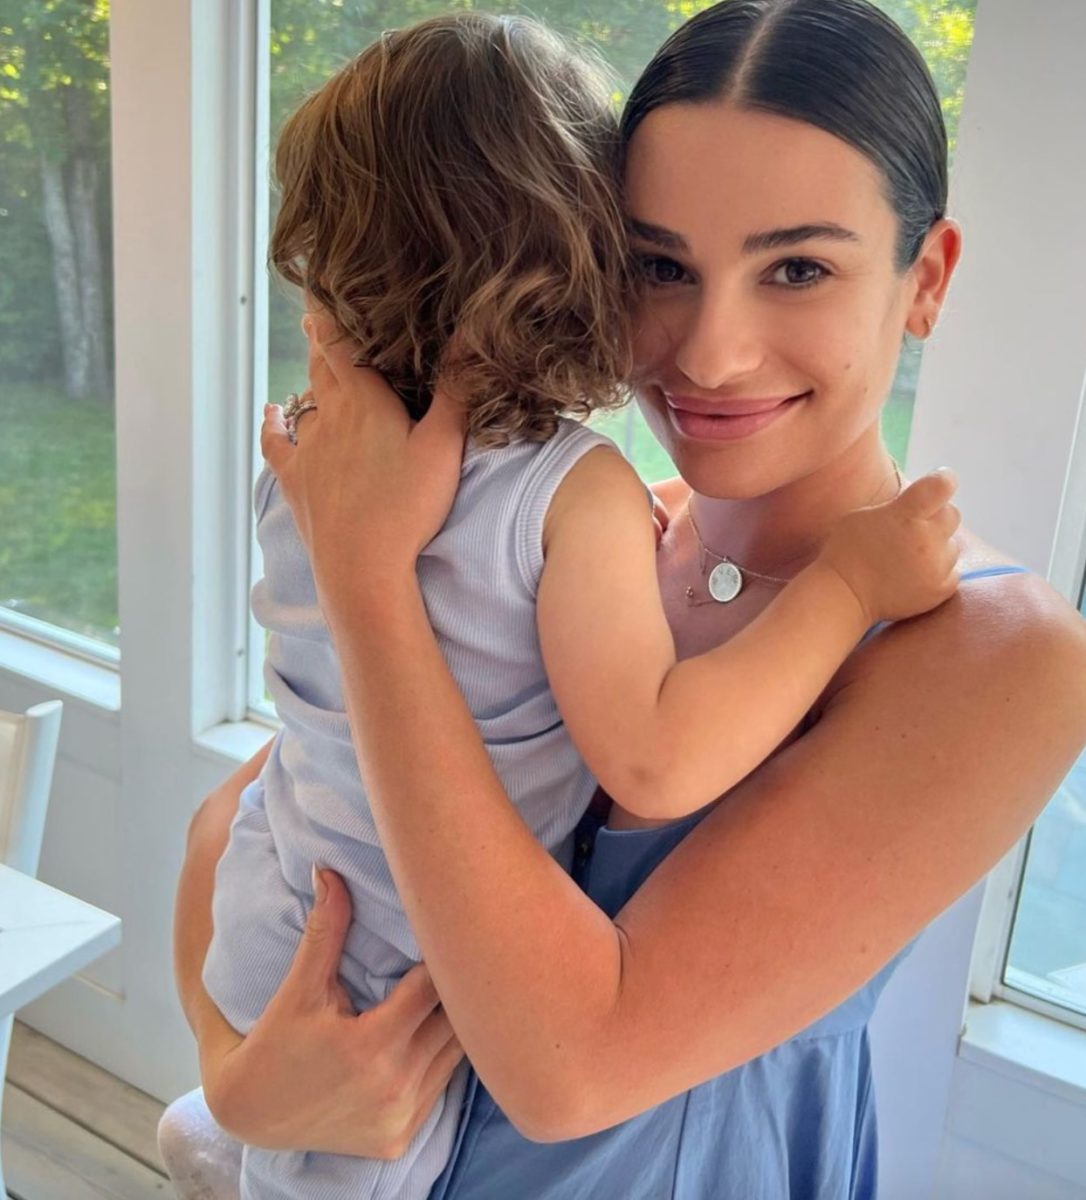 Lea Michele Shares Heartbreaking Photo of Her Son as He Continues to Battle Illness | Almost two weeks since Broadway star Lea Michele revealed her 2-year-old was in ill health, the actress has shared another heartbreaking update.